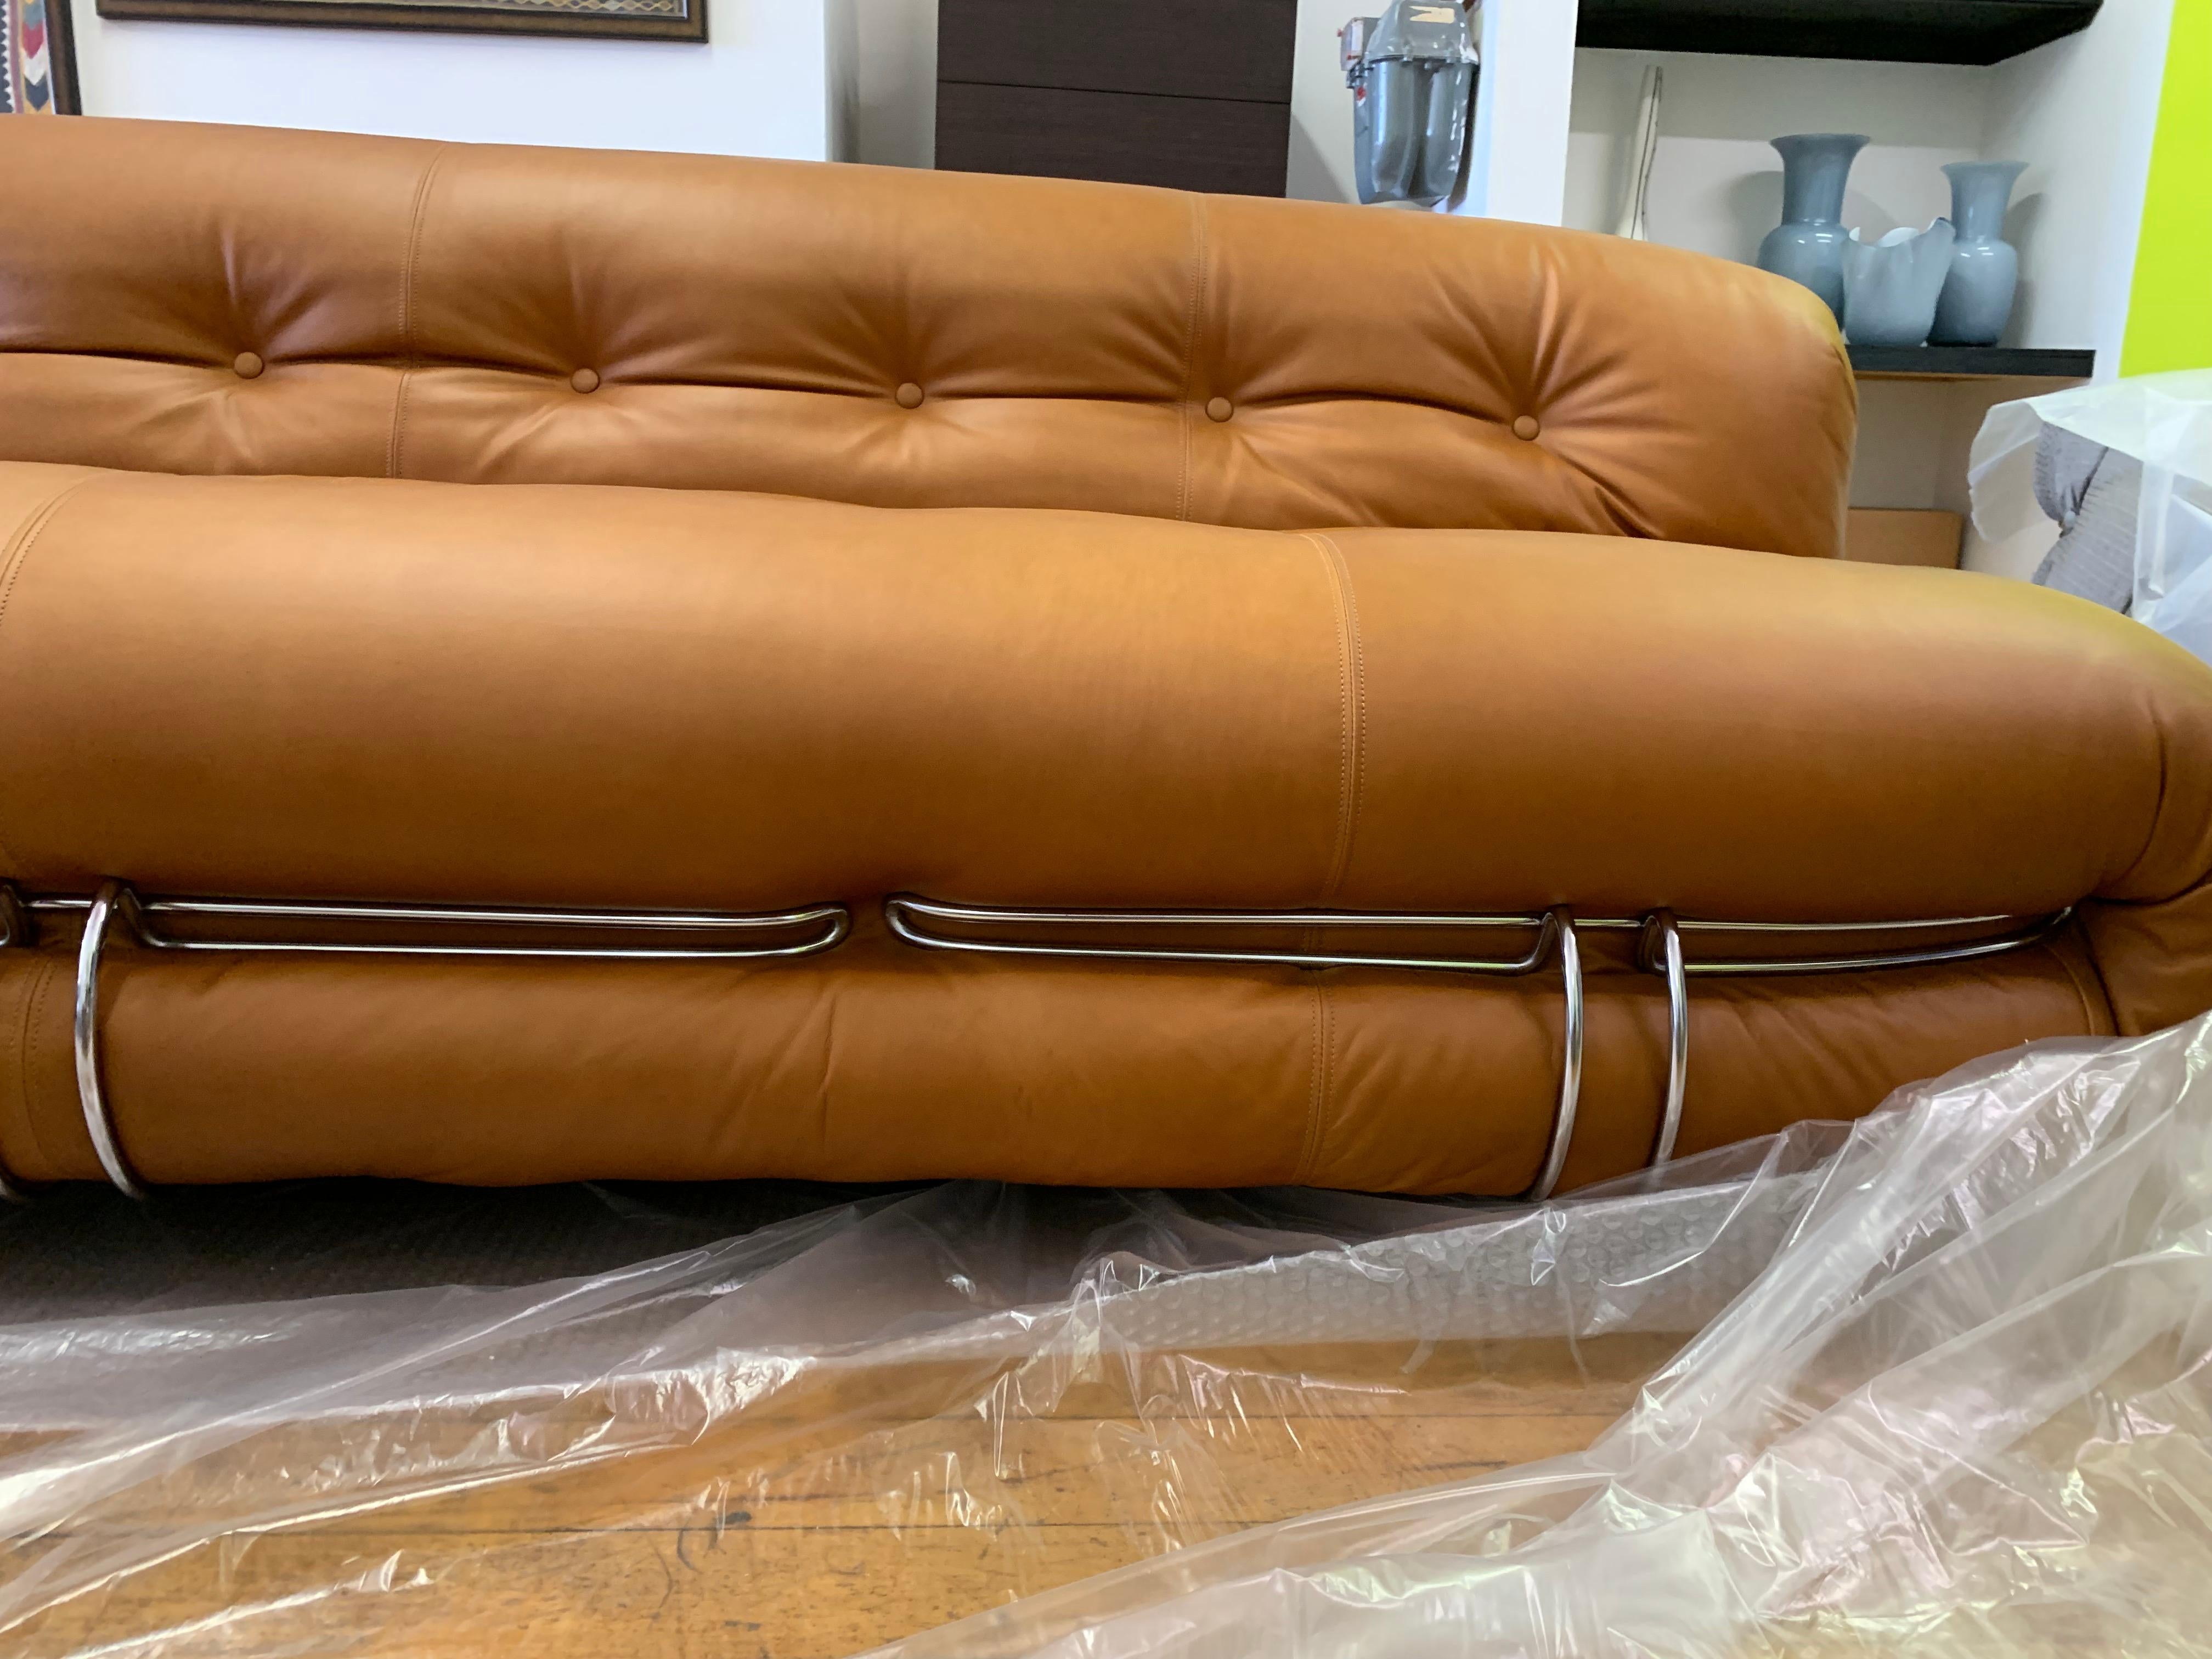 2 soriana sofas special order for customer  3